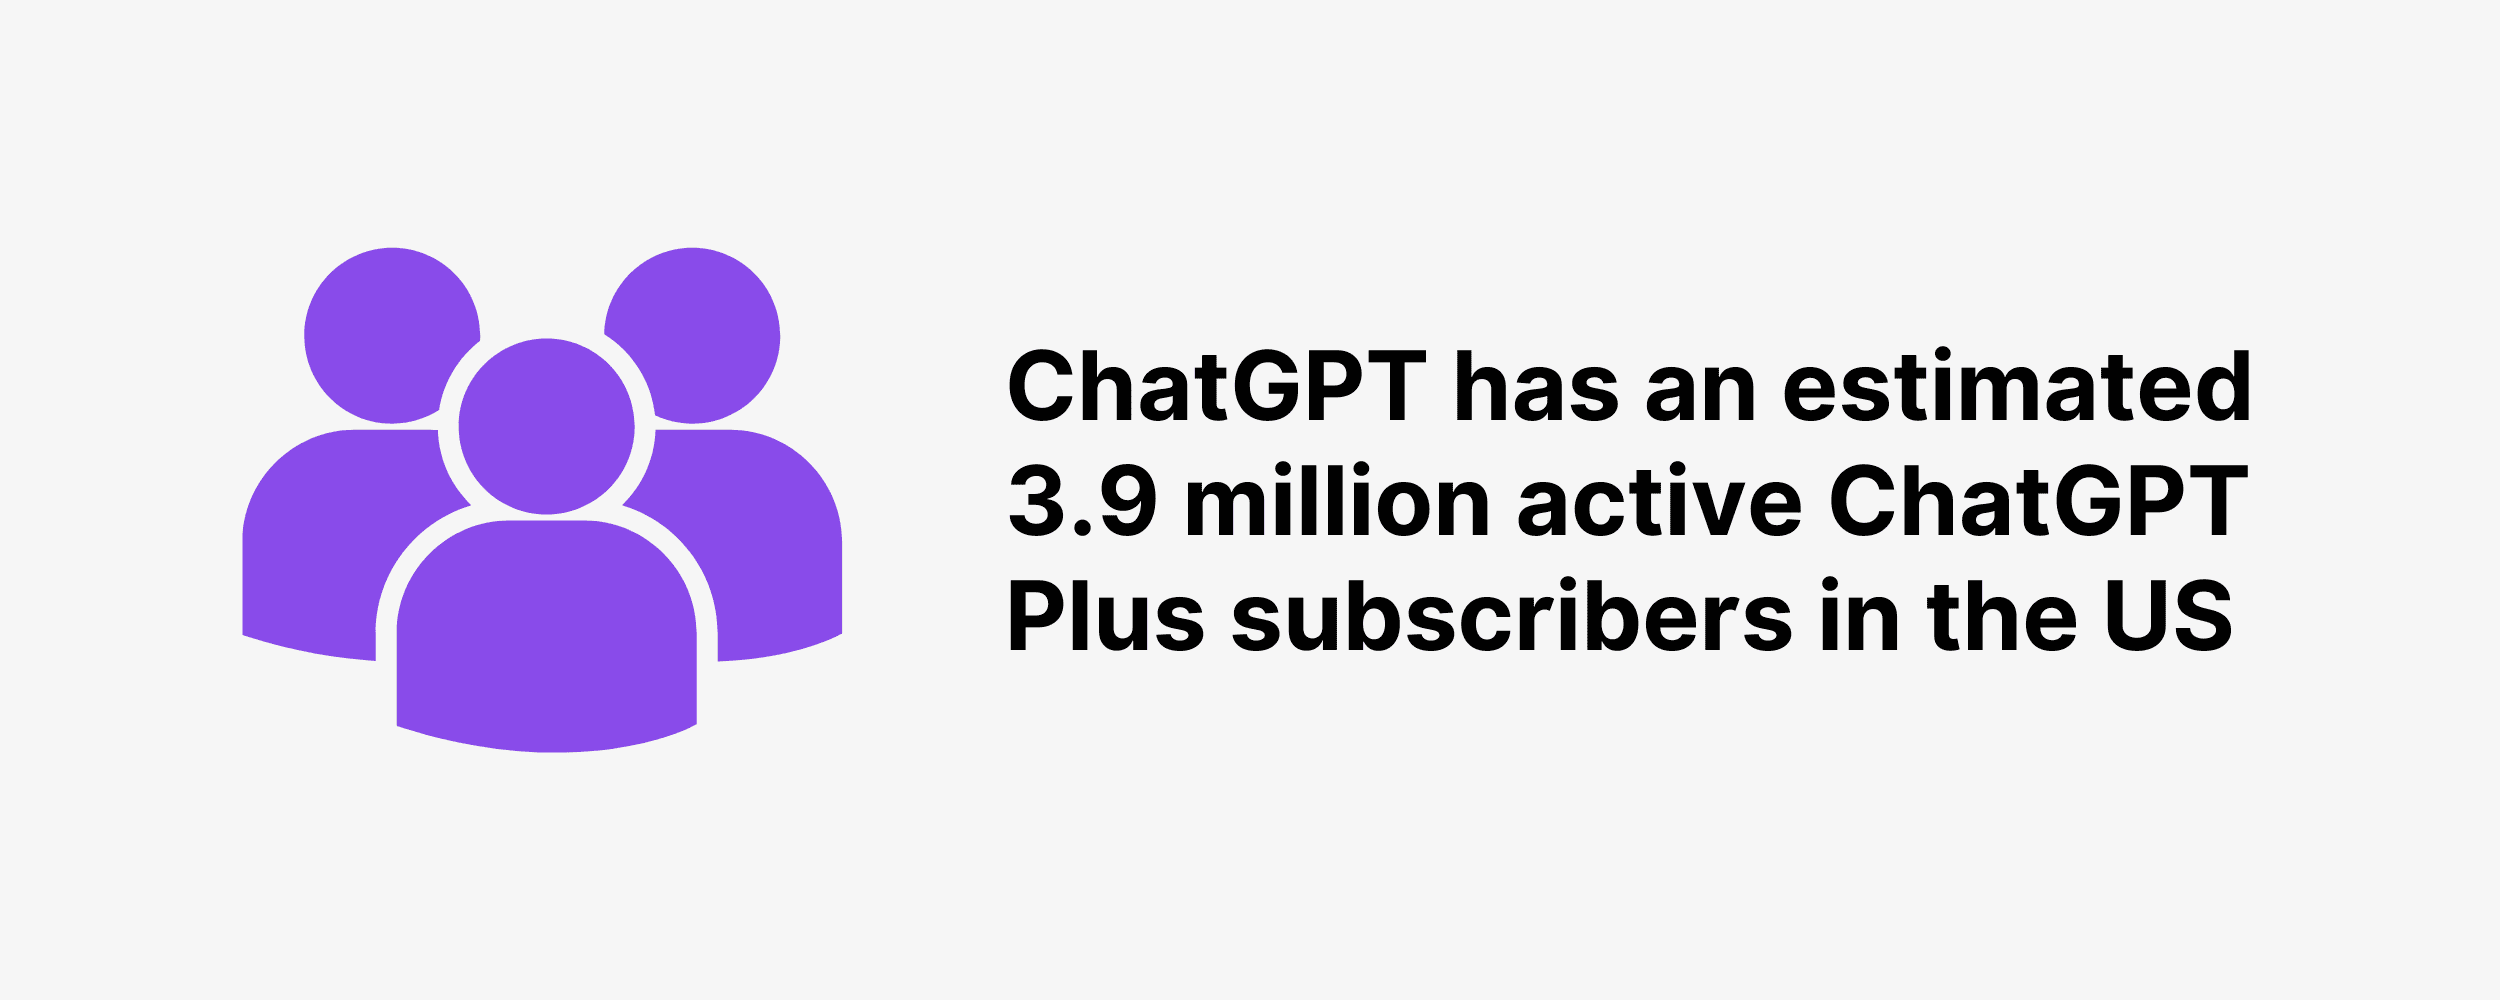 ChatGPT has an estimated 3.9 million active ChatGPT Plus subscribers in the US